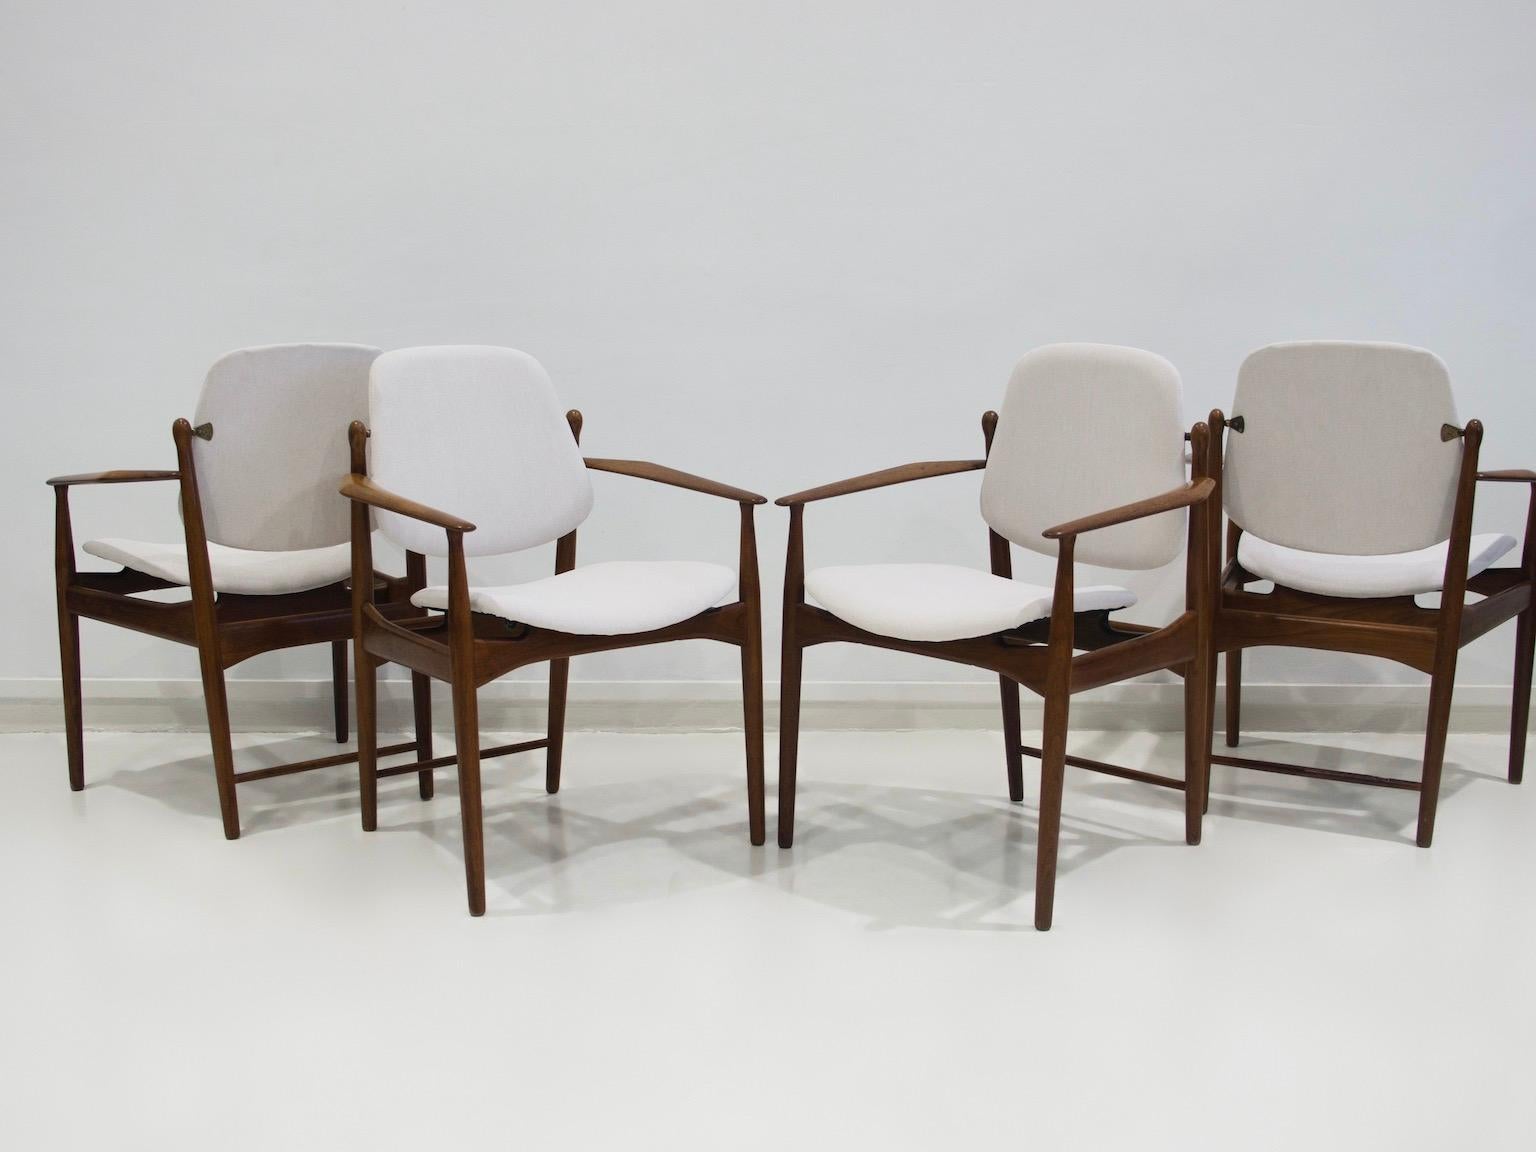 Four armchairs with teak frame designed by Arne Vodder and manufactured by France & Daverkosen in Denmark, circa 1950s-1960s. Upholstered seat and tilting backrest. Labeled France & Daverkosen, Denmark. New very light beige fabric upholstery, looks